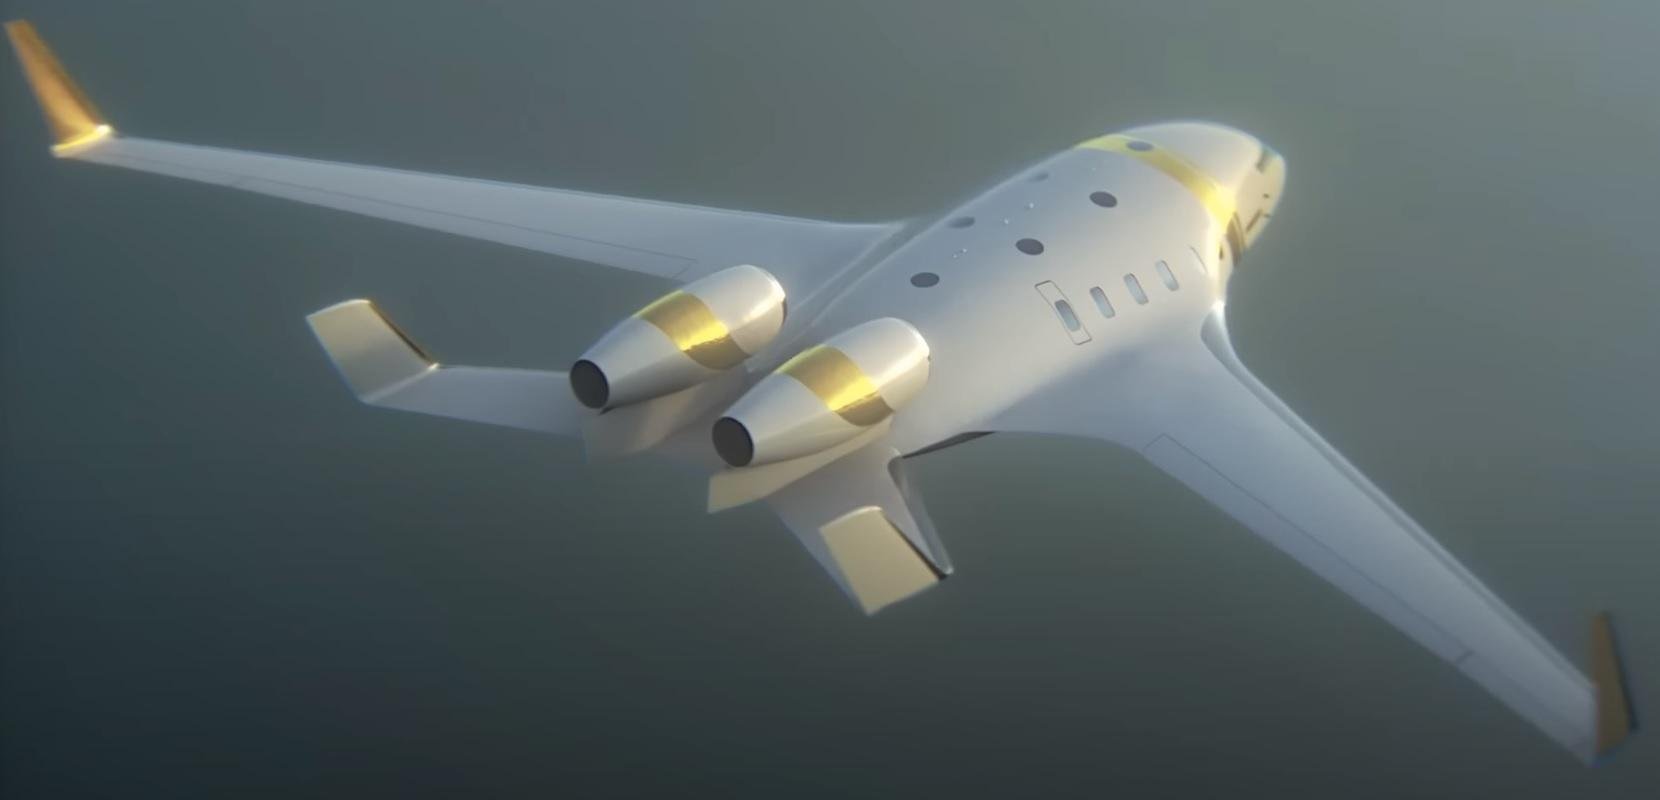 Bombardier advances in blended-wing-body business jet study - Air Data News